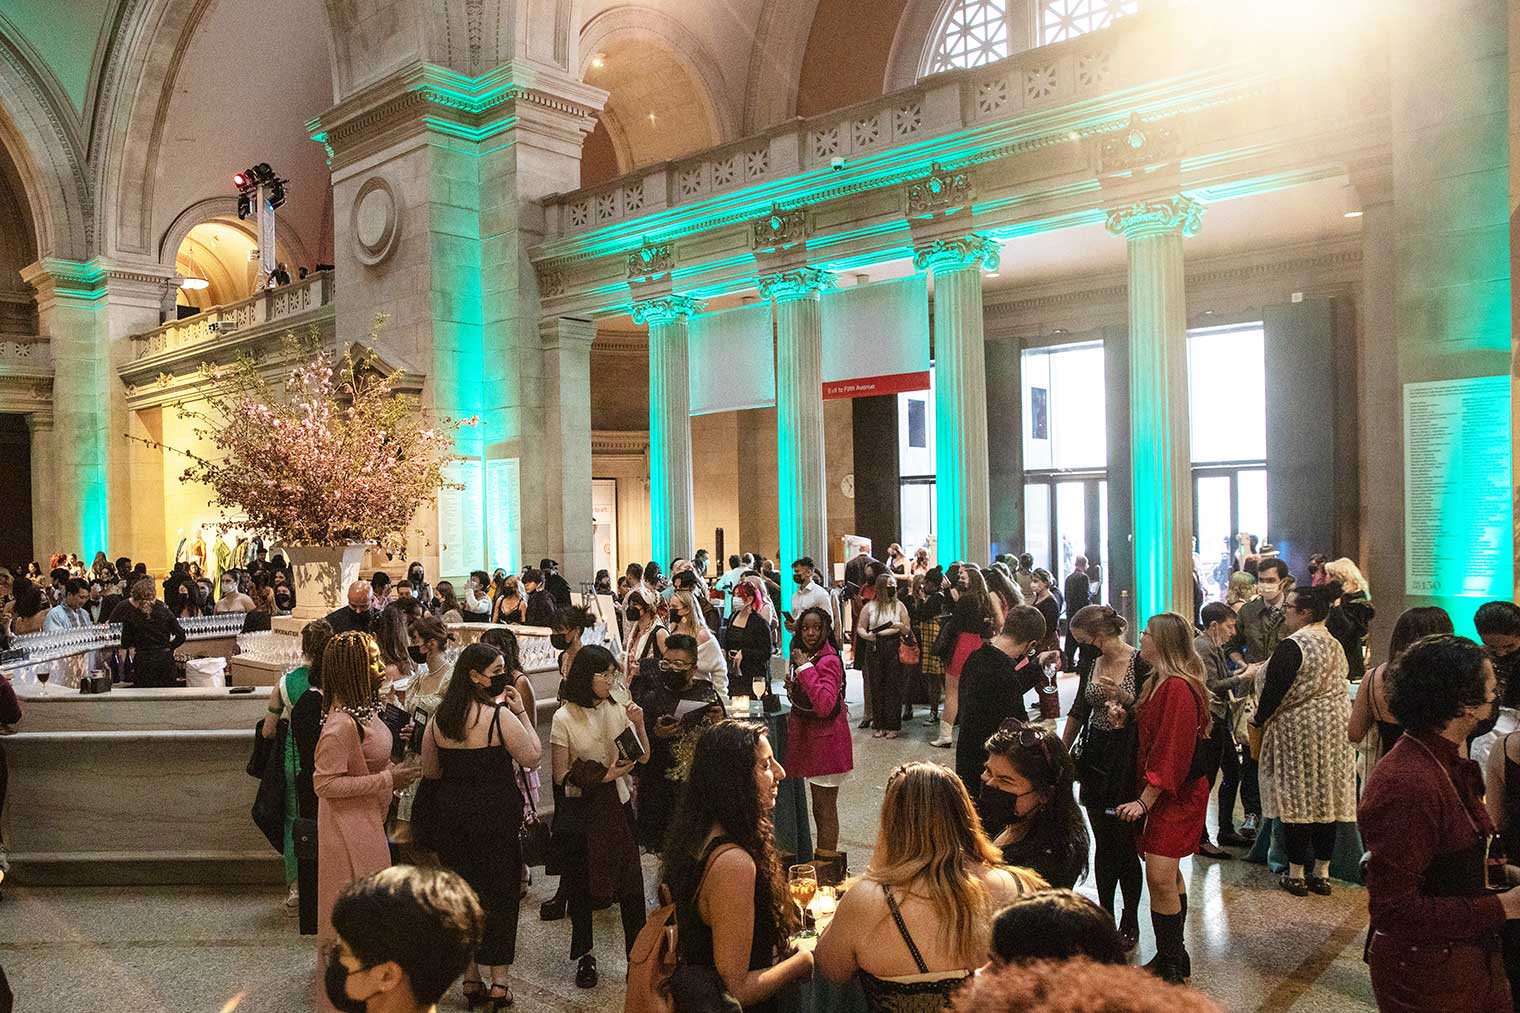 Young people dressed for an evening out gather in a gallery space with very high ceilings and party lights.